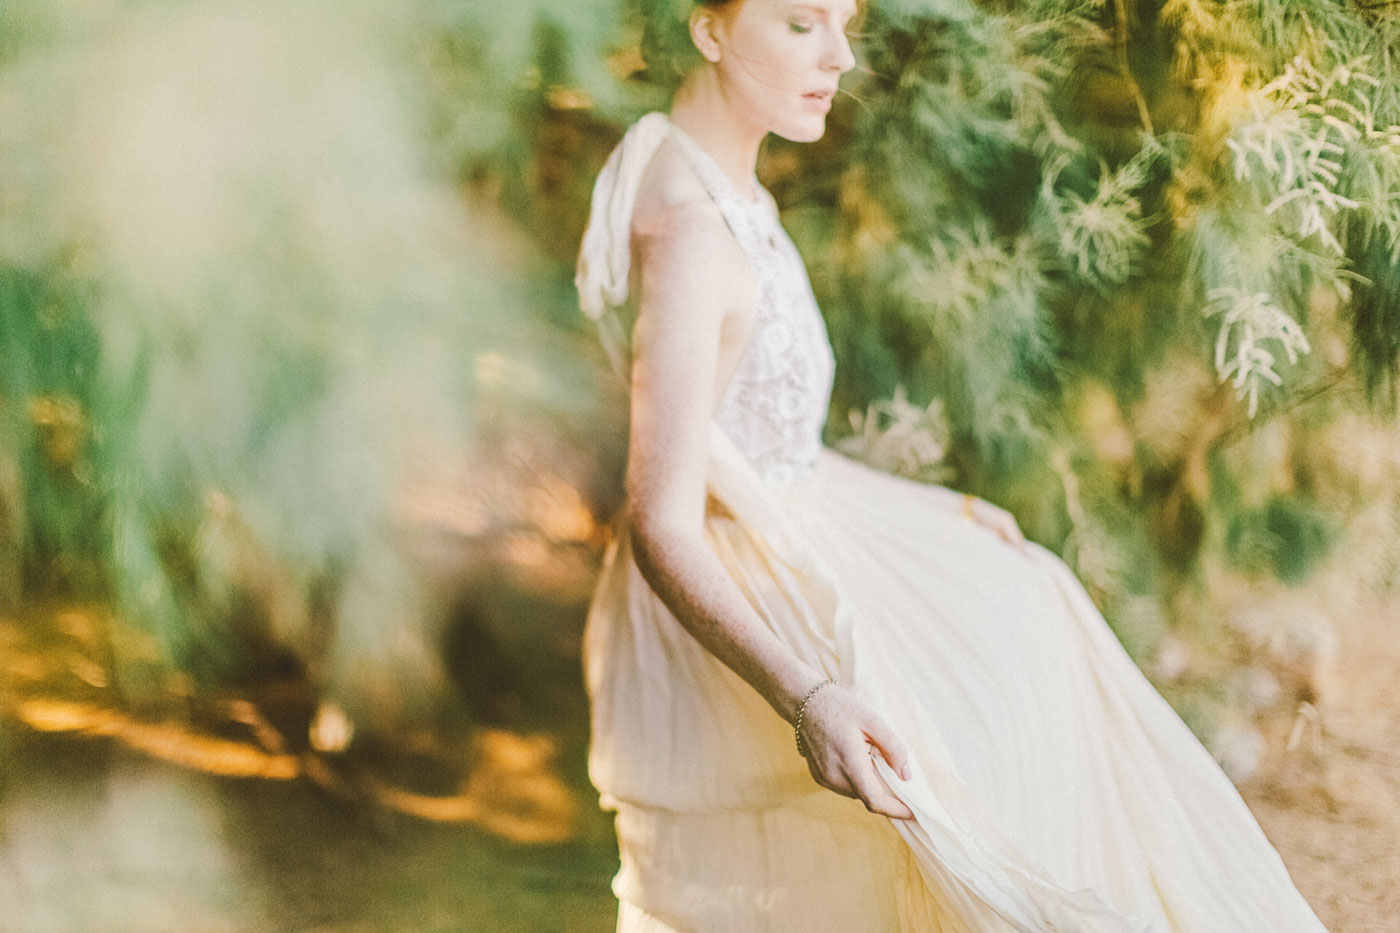 Delicate and whimsical bride Hawaii destination wedding photographer